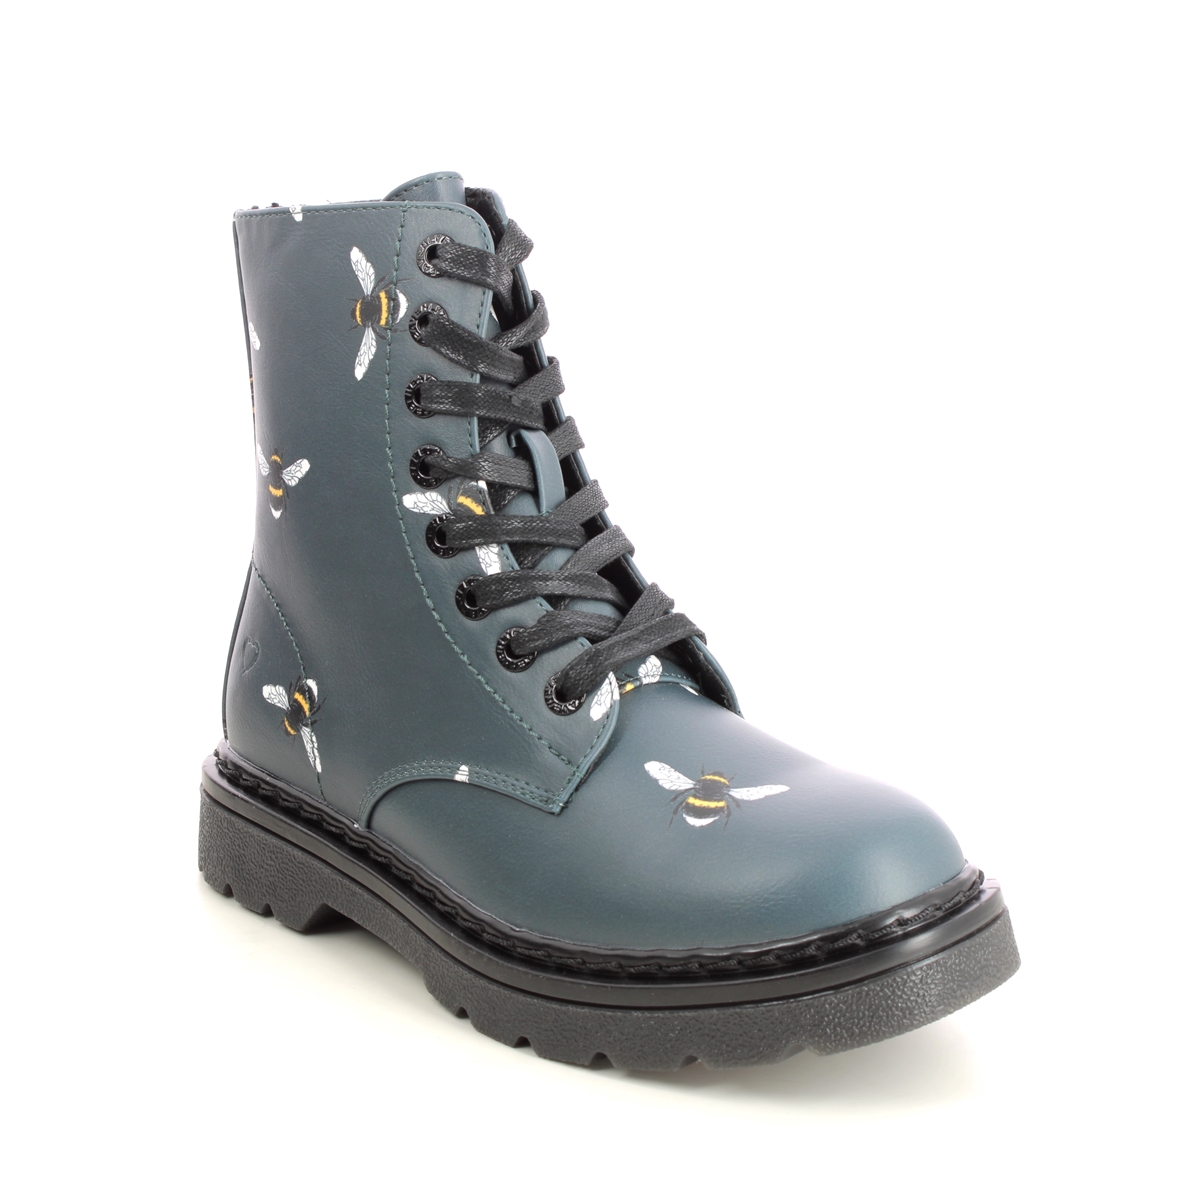 Heavenly Feet Justina 2 Bee Teal Blue Womens Biker Boots 3501-73 In Size 7 In Plain Teal Blue